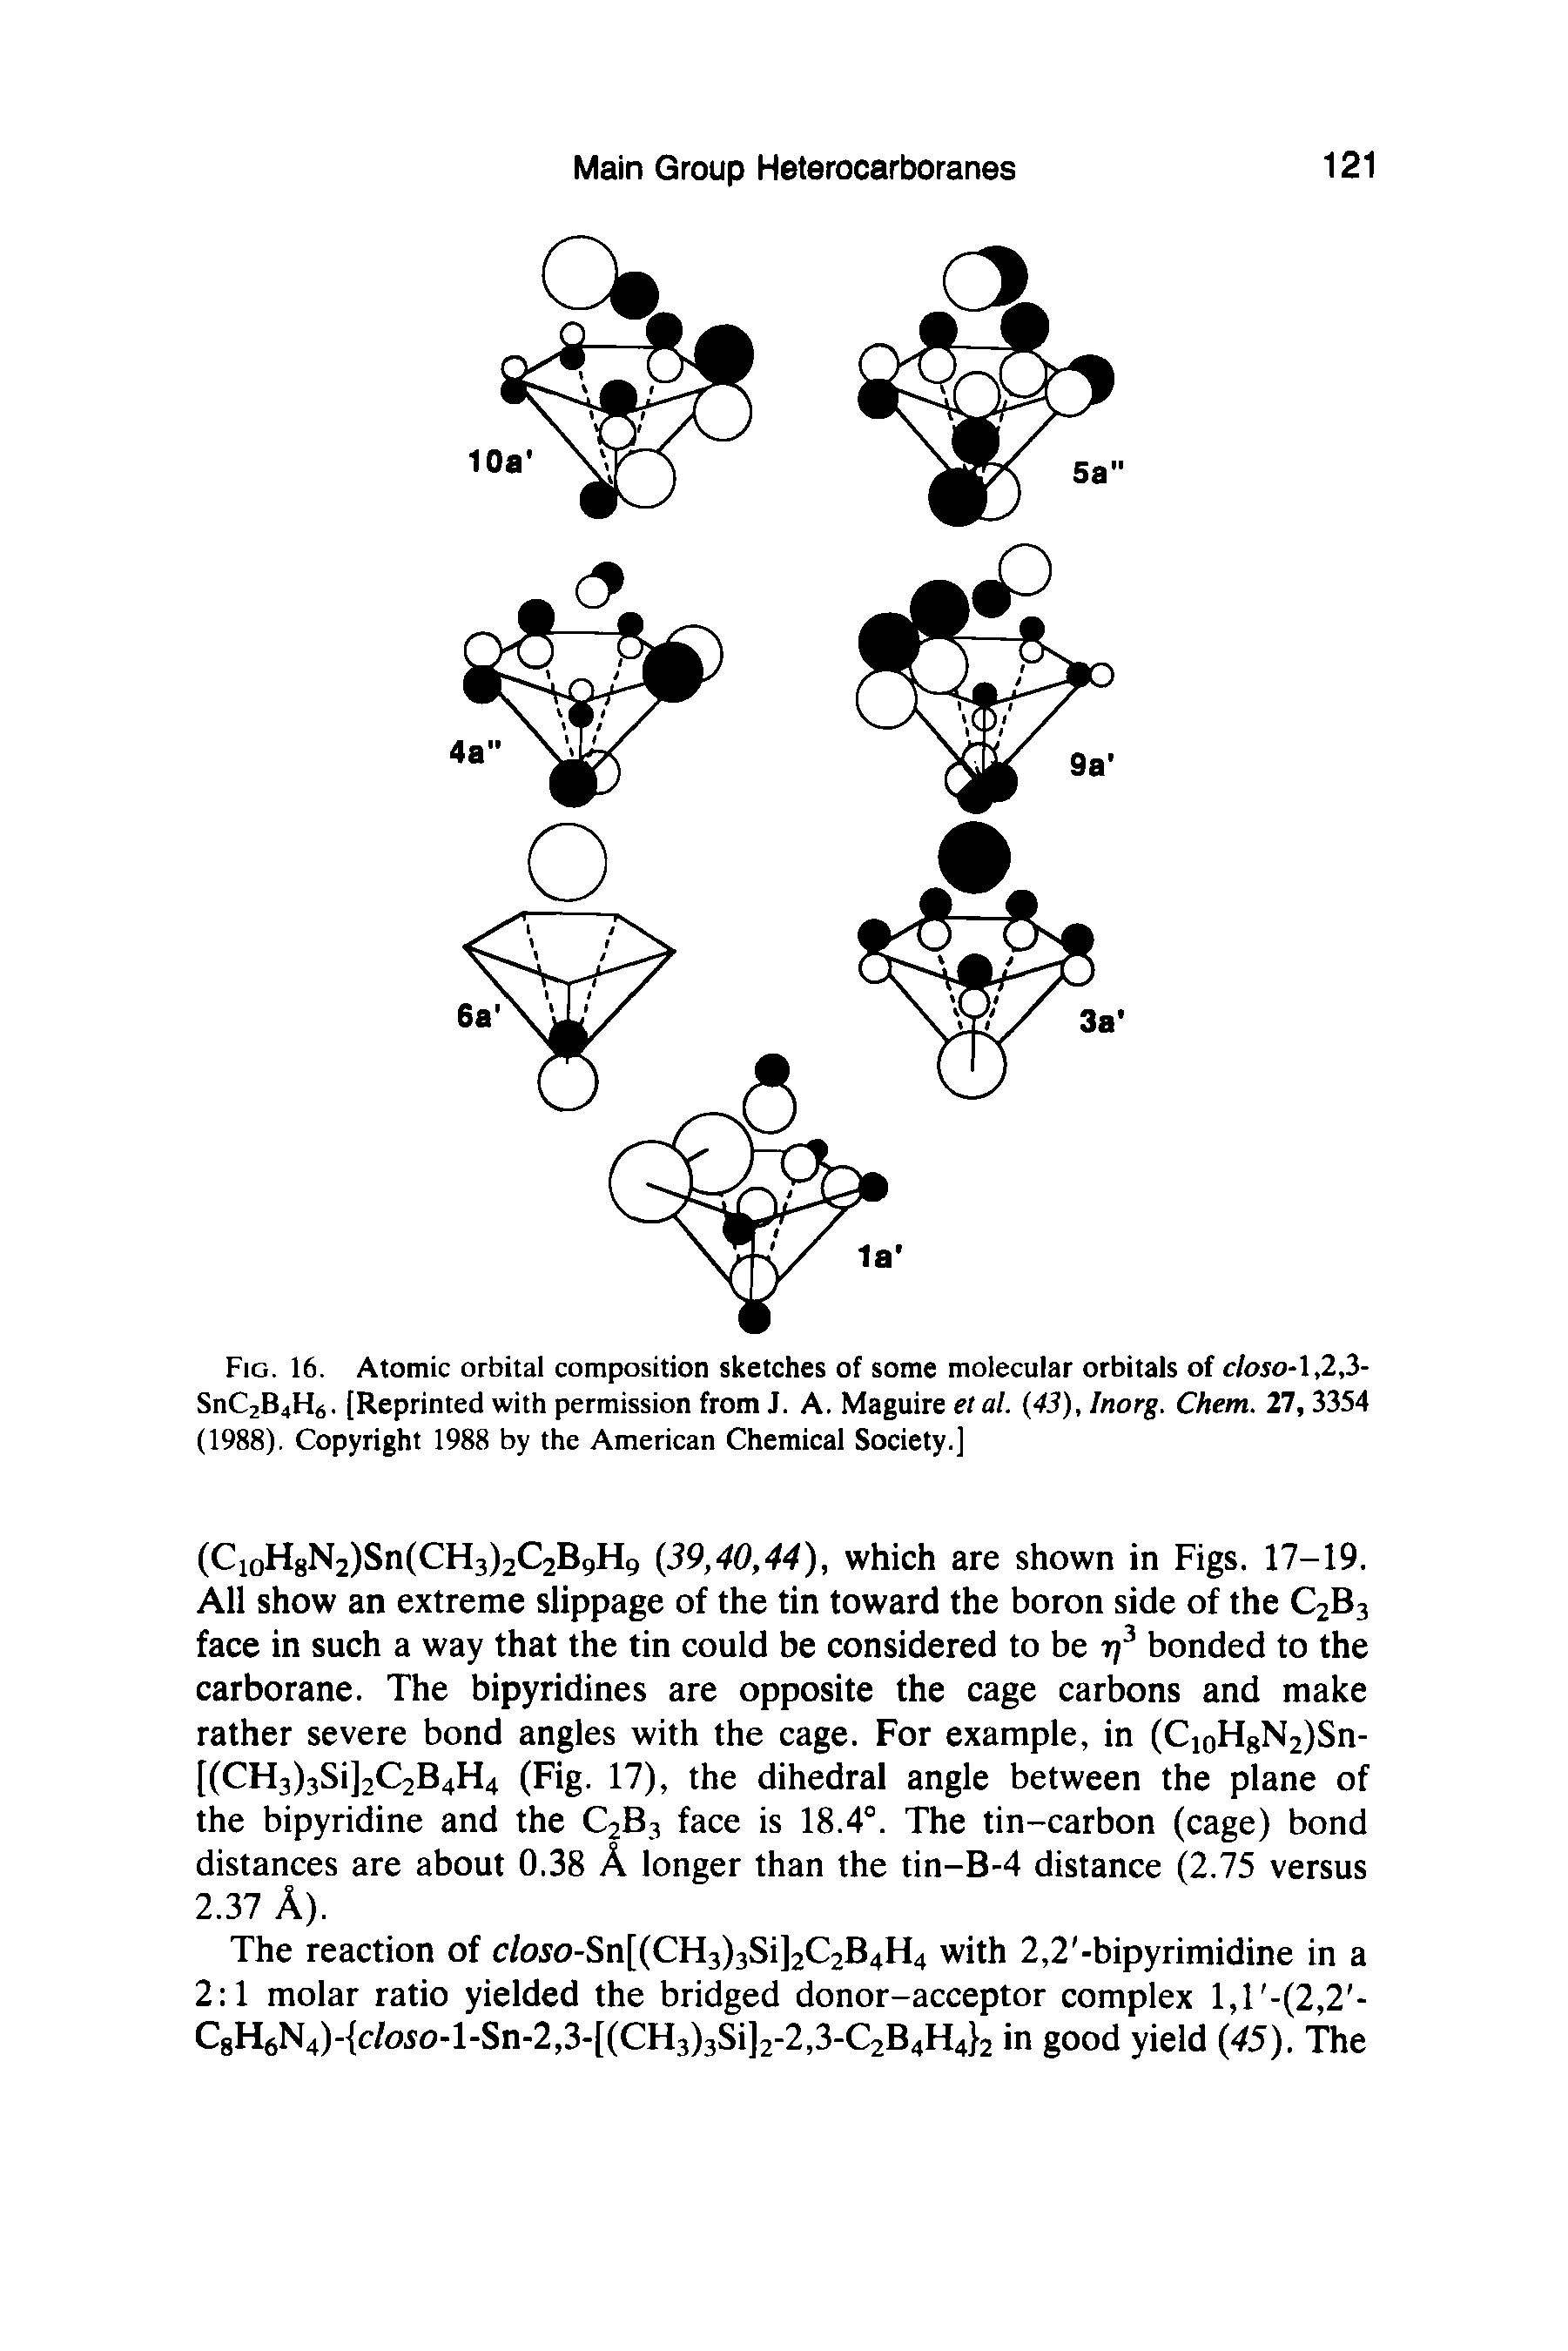 Fig. 16. Atomic orbital composition sketches of some molecular orbitals of closo-1,2,3-SnC2B4H6. [Reprinted with permission from J. A. Maguire etal. (43), Inorg. Chem. 27, 3354 (1988). Copyright 1988 by the American Chemical Society.]...